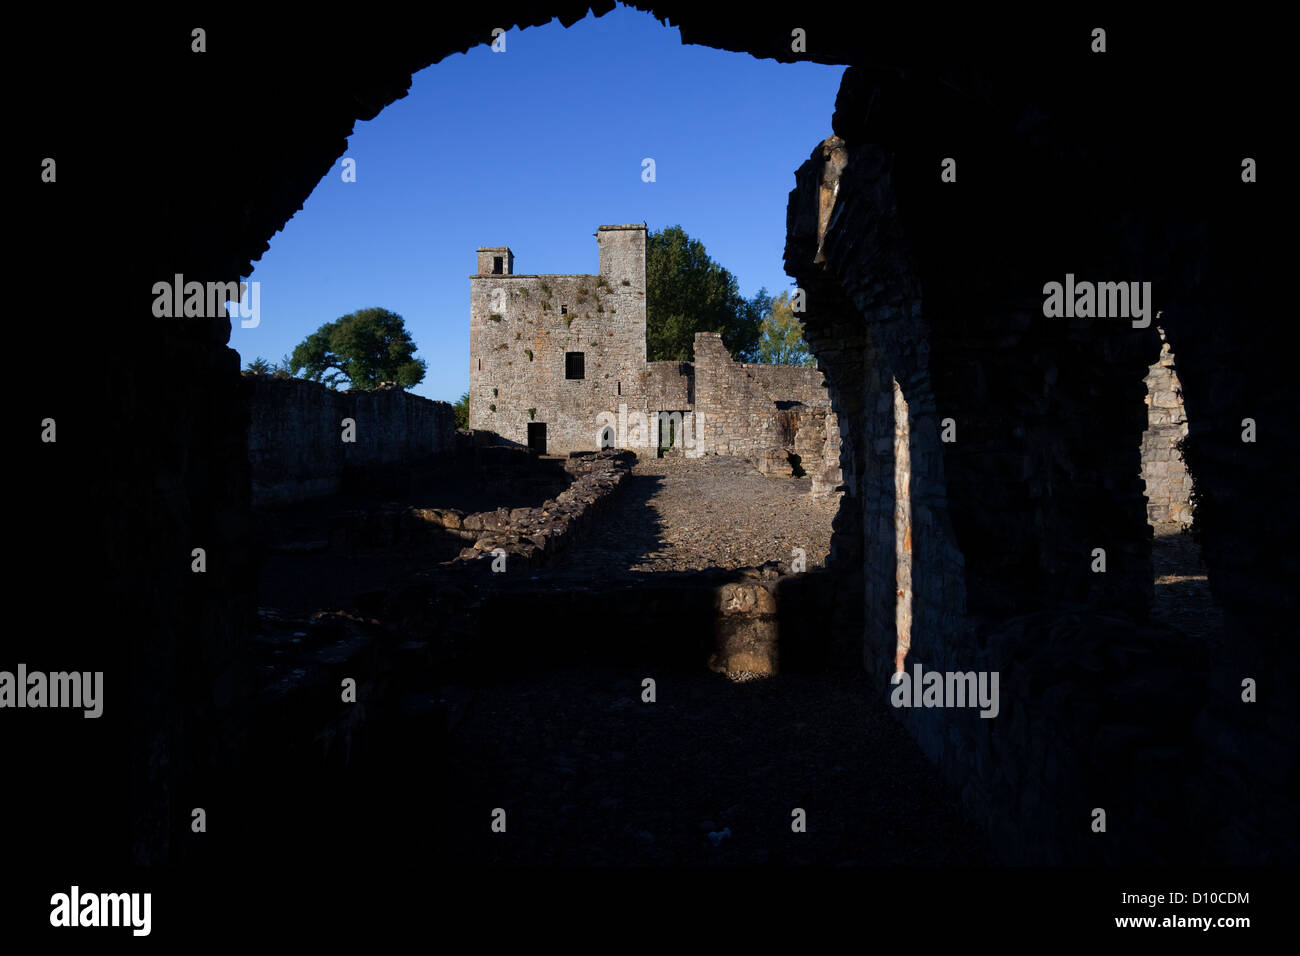 The ruins of the Tower House in the 13th Century Priory of St John the Baptist, Trim, County Meath, Ireland Stock Photo